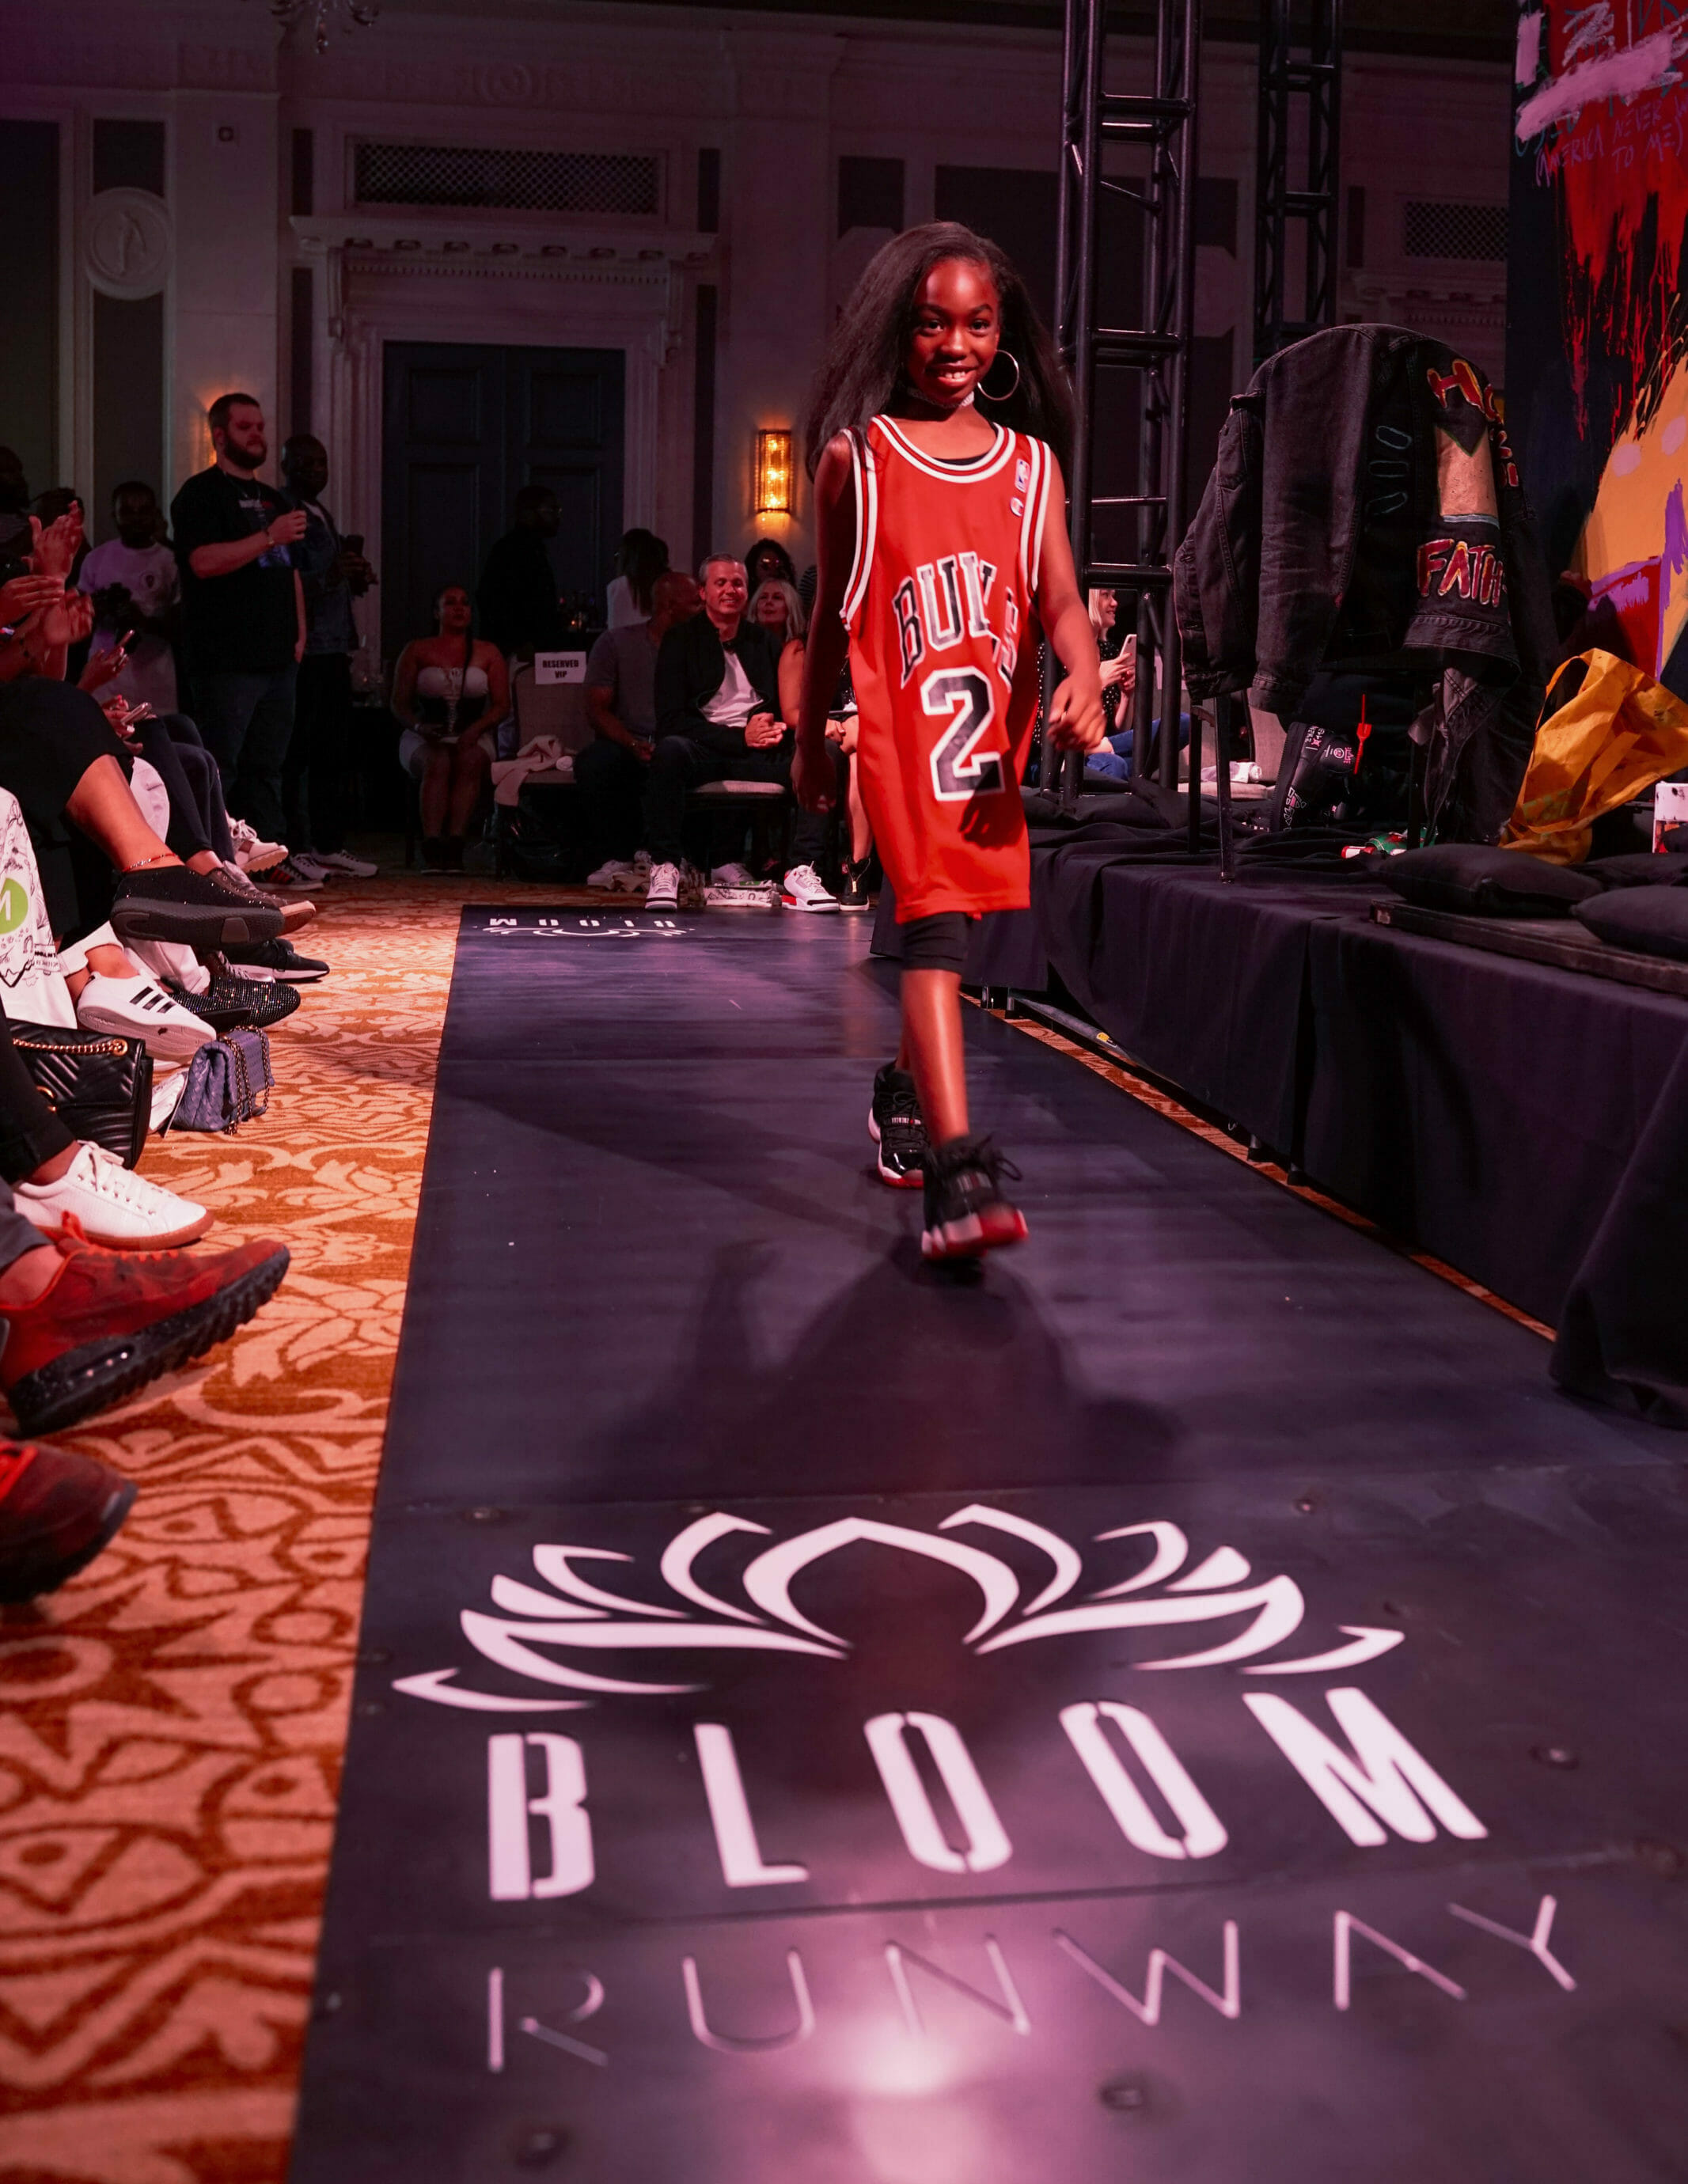 A child wearing a Bulls basketball jersey and gold hoop earrings walks confidently down a runway with “Bloom Beauty Collective” decals.